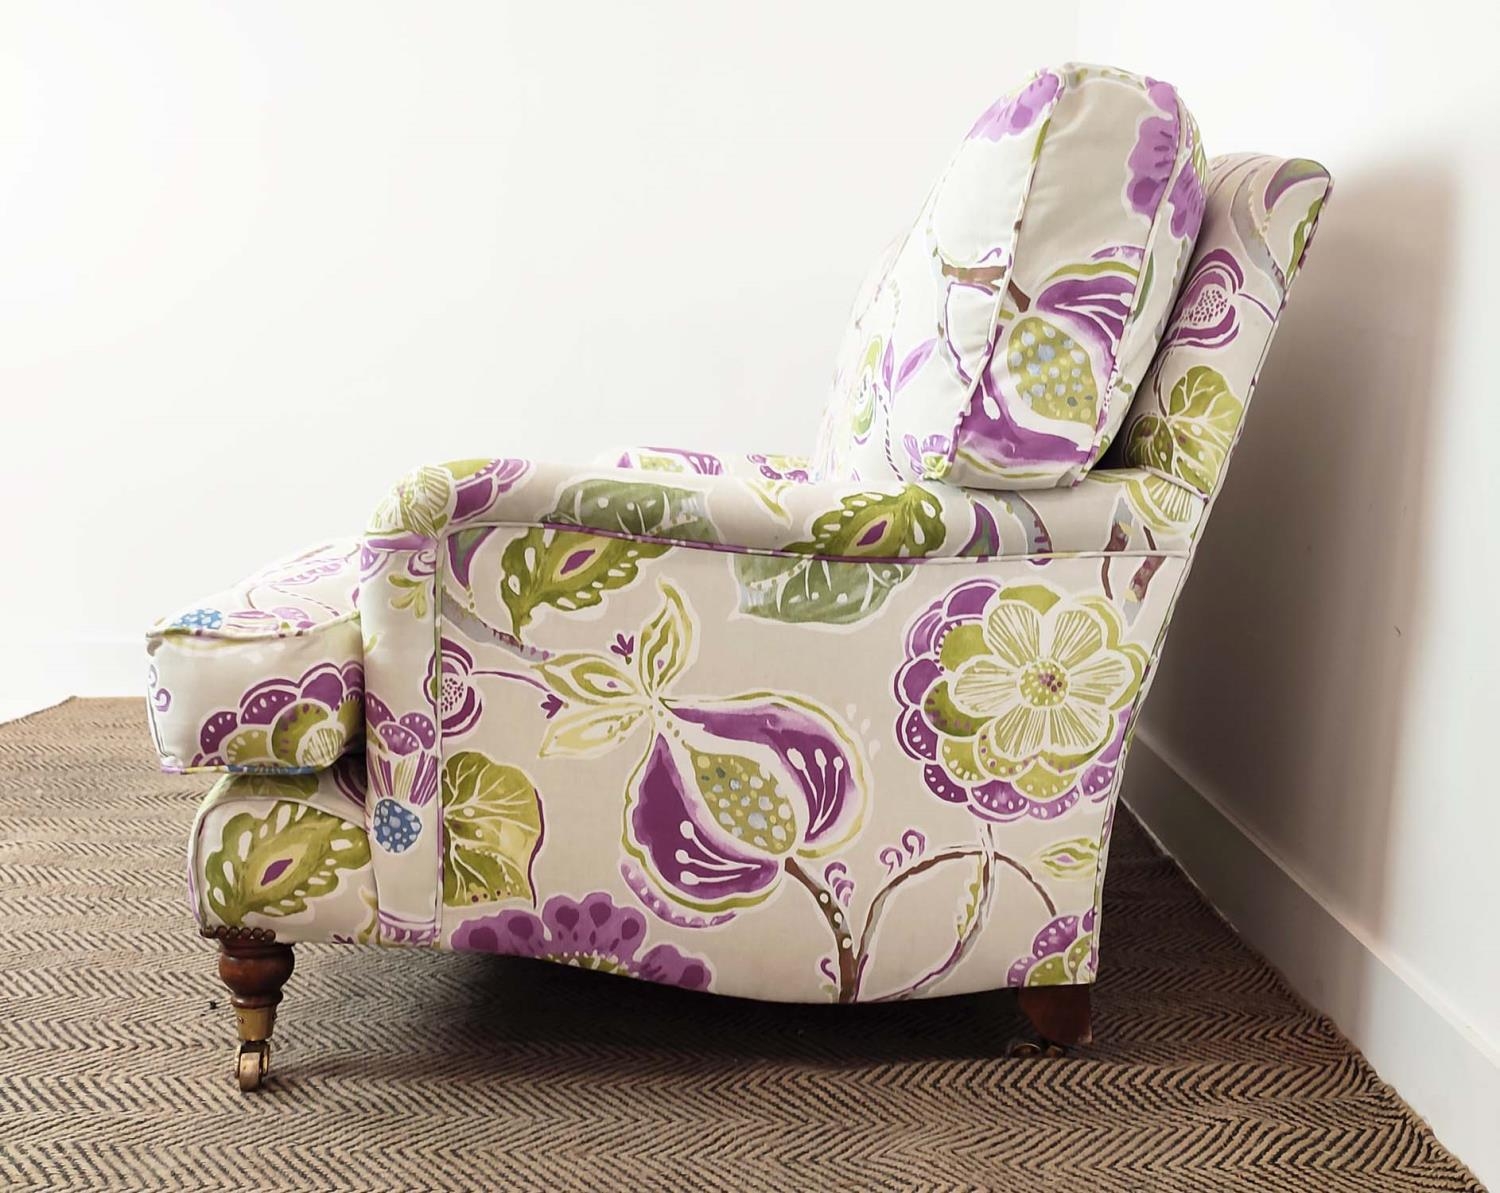 SOFA, purple and green floral patterned on brass castors, 90cm H x 160cm W. - Image 10 of 14